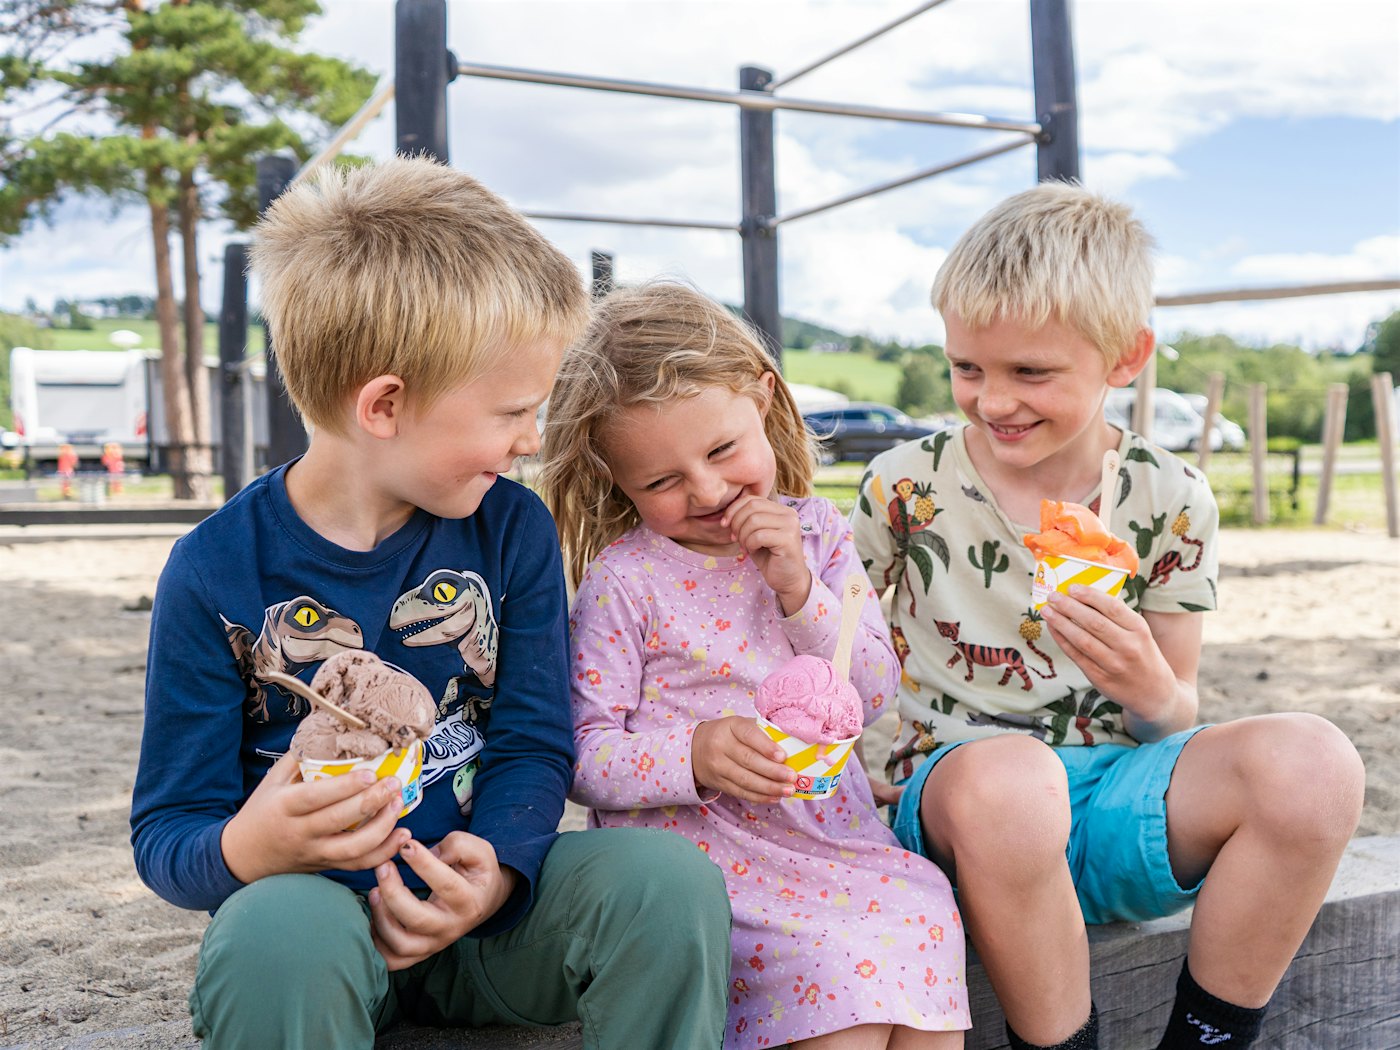 Two boys and a girl are sitting on a playground and eating ice cream. Photo